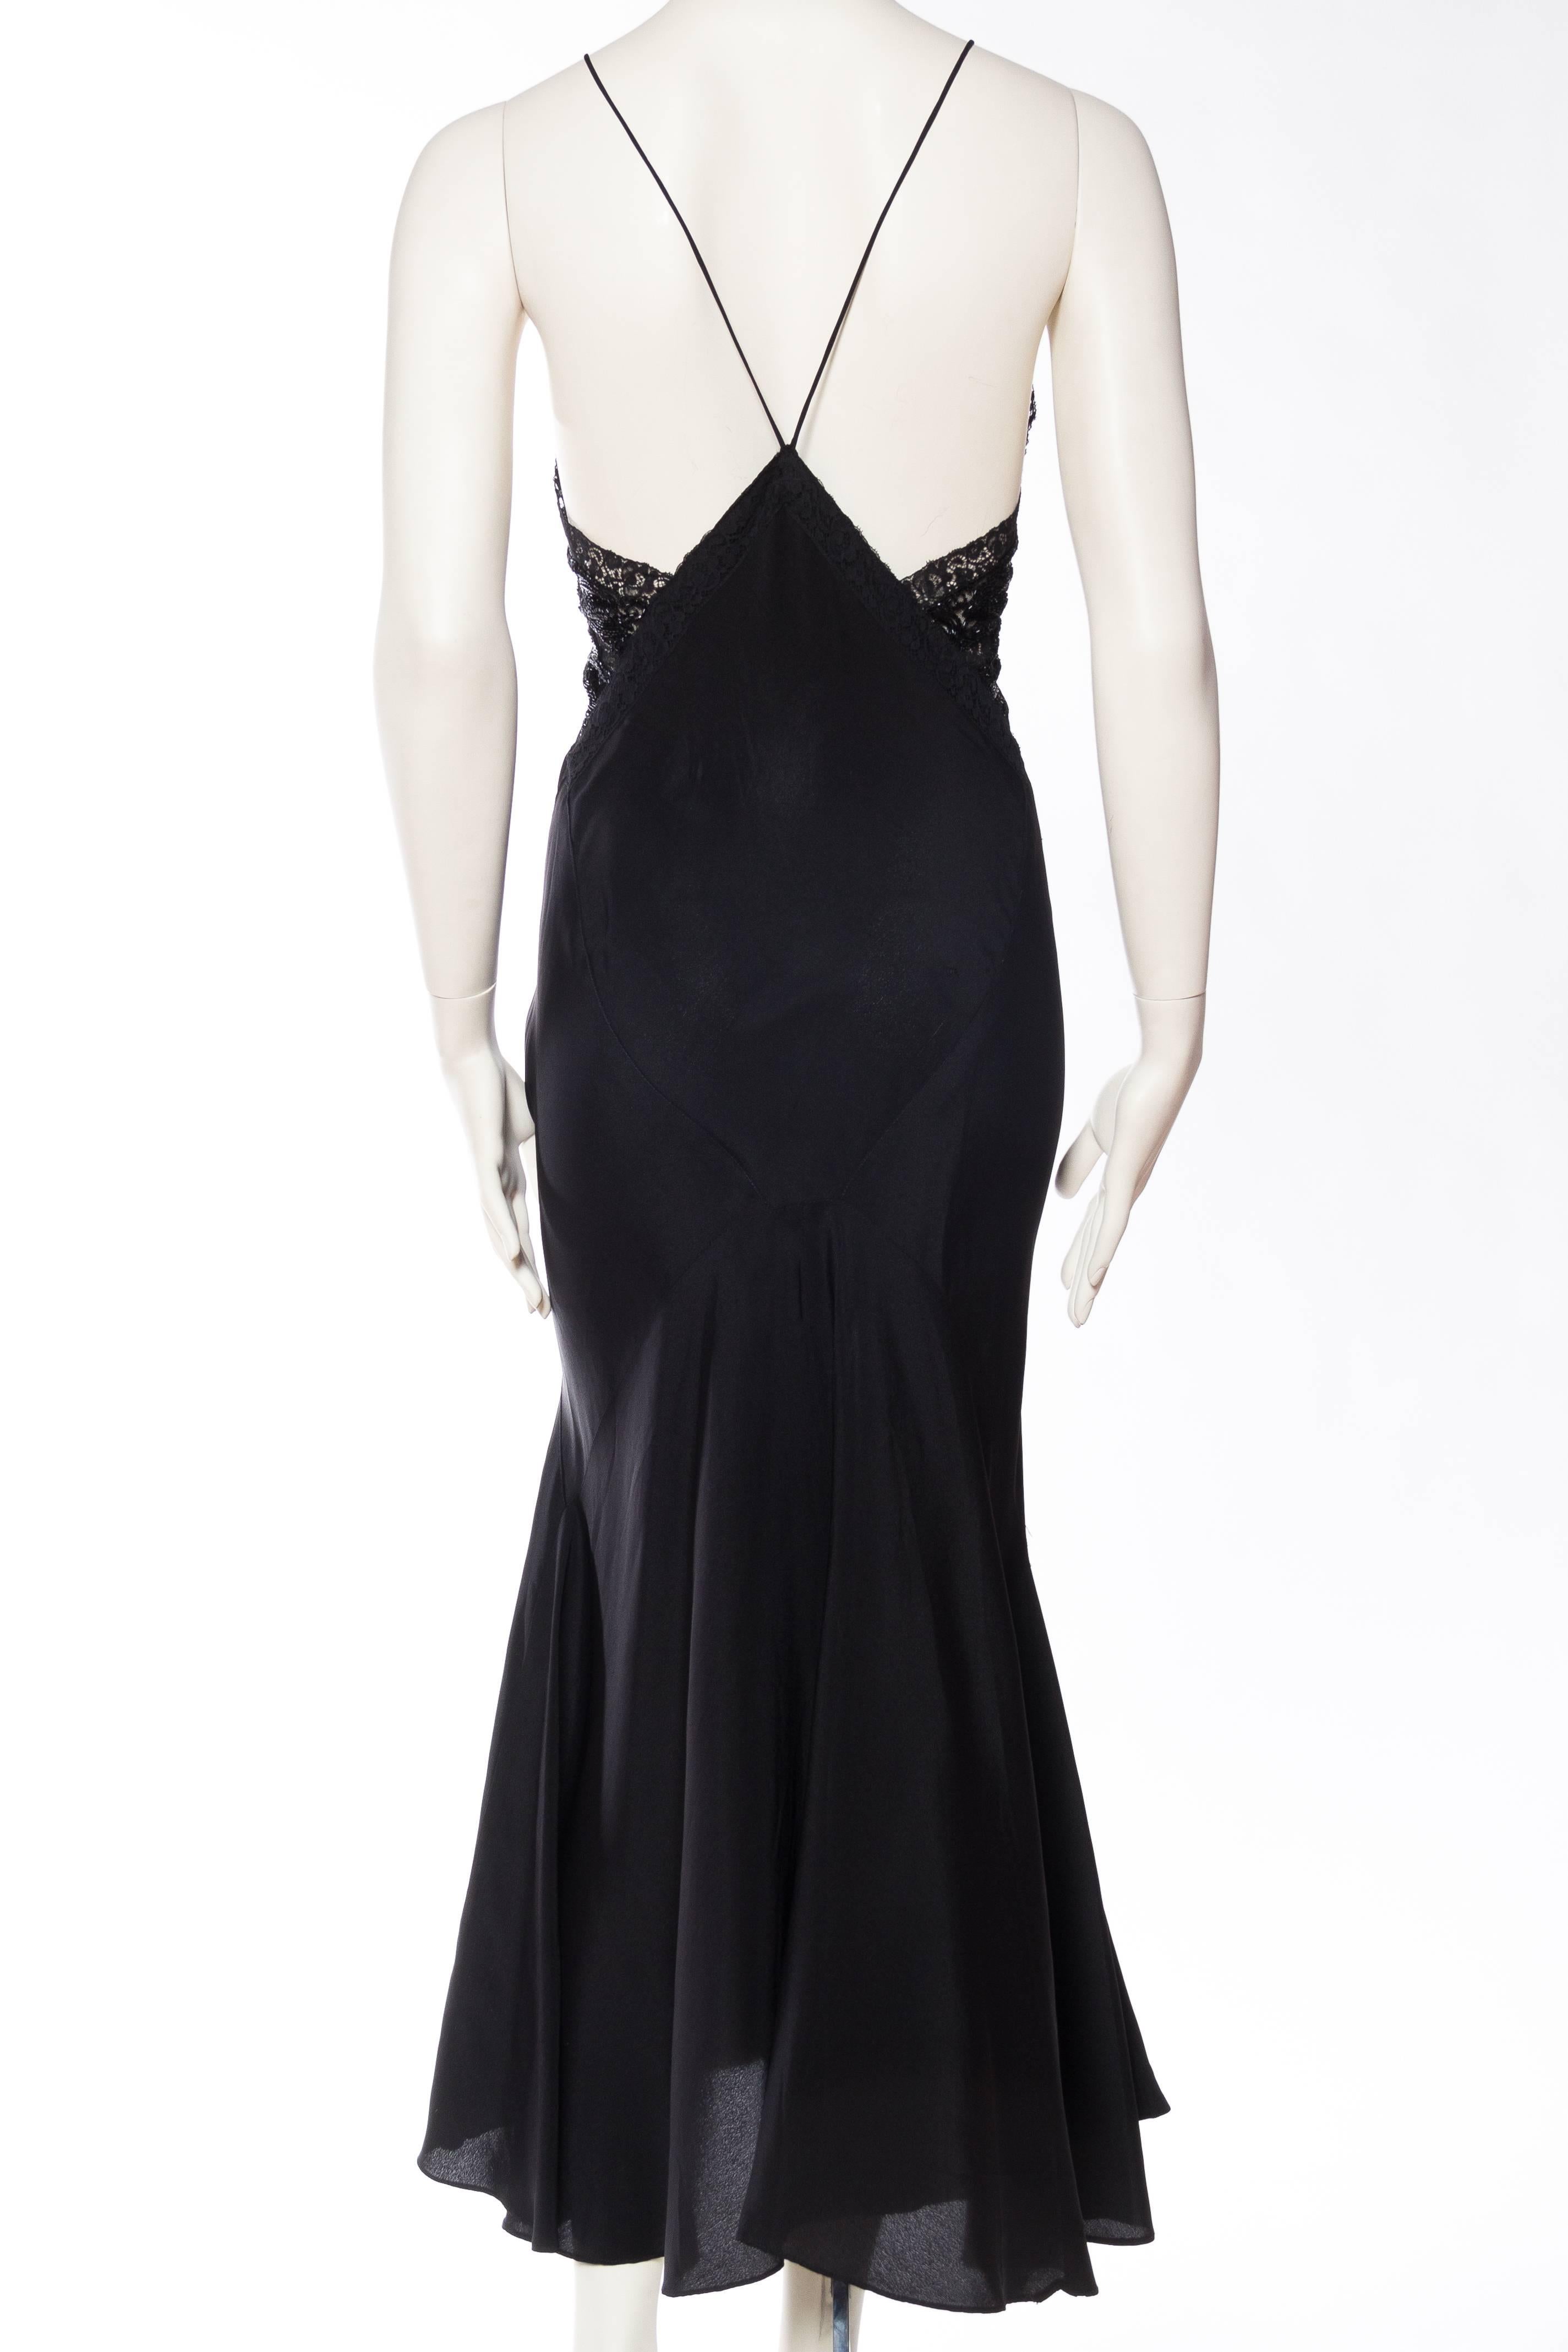 MORPHEW COLLECTION Black Bias Cut Silk Crepe De Chine Backless Gown With Edward In Excellent Condition For Sale In New York, NY